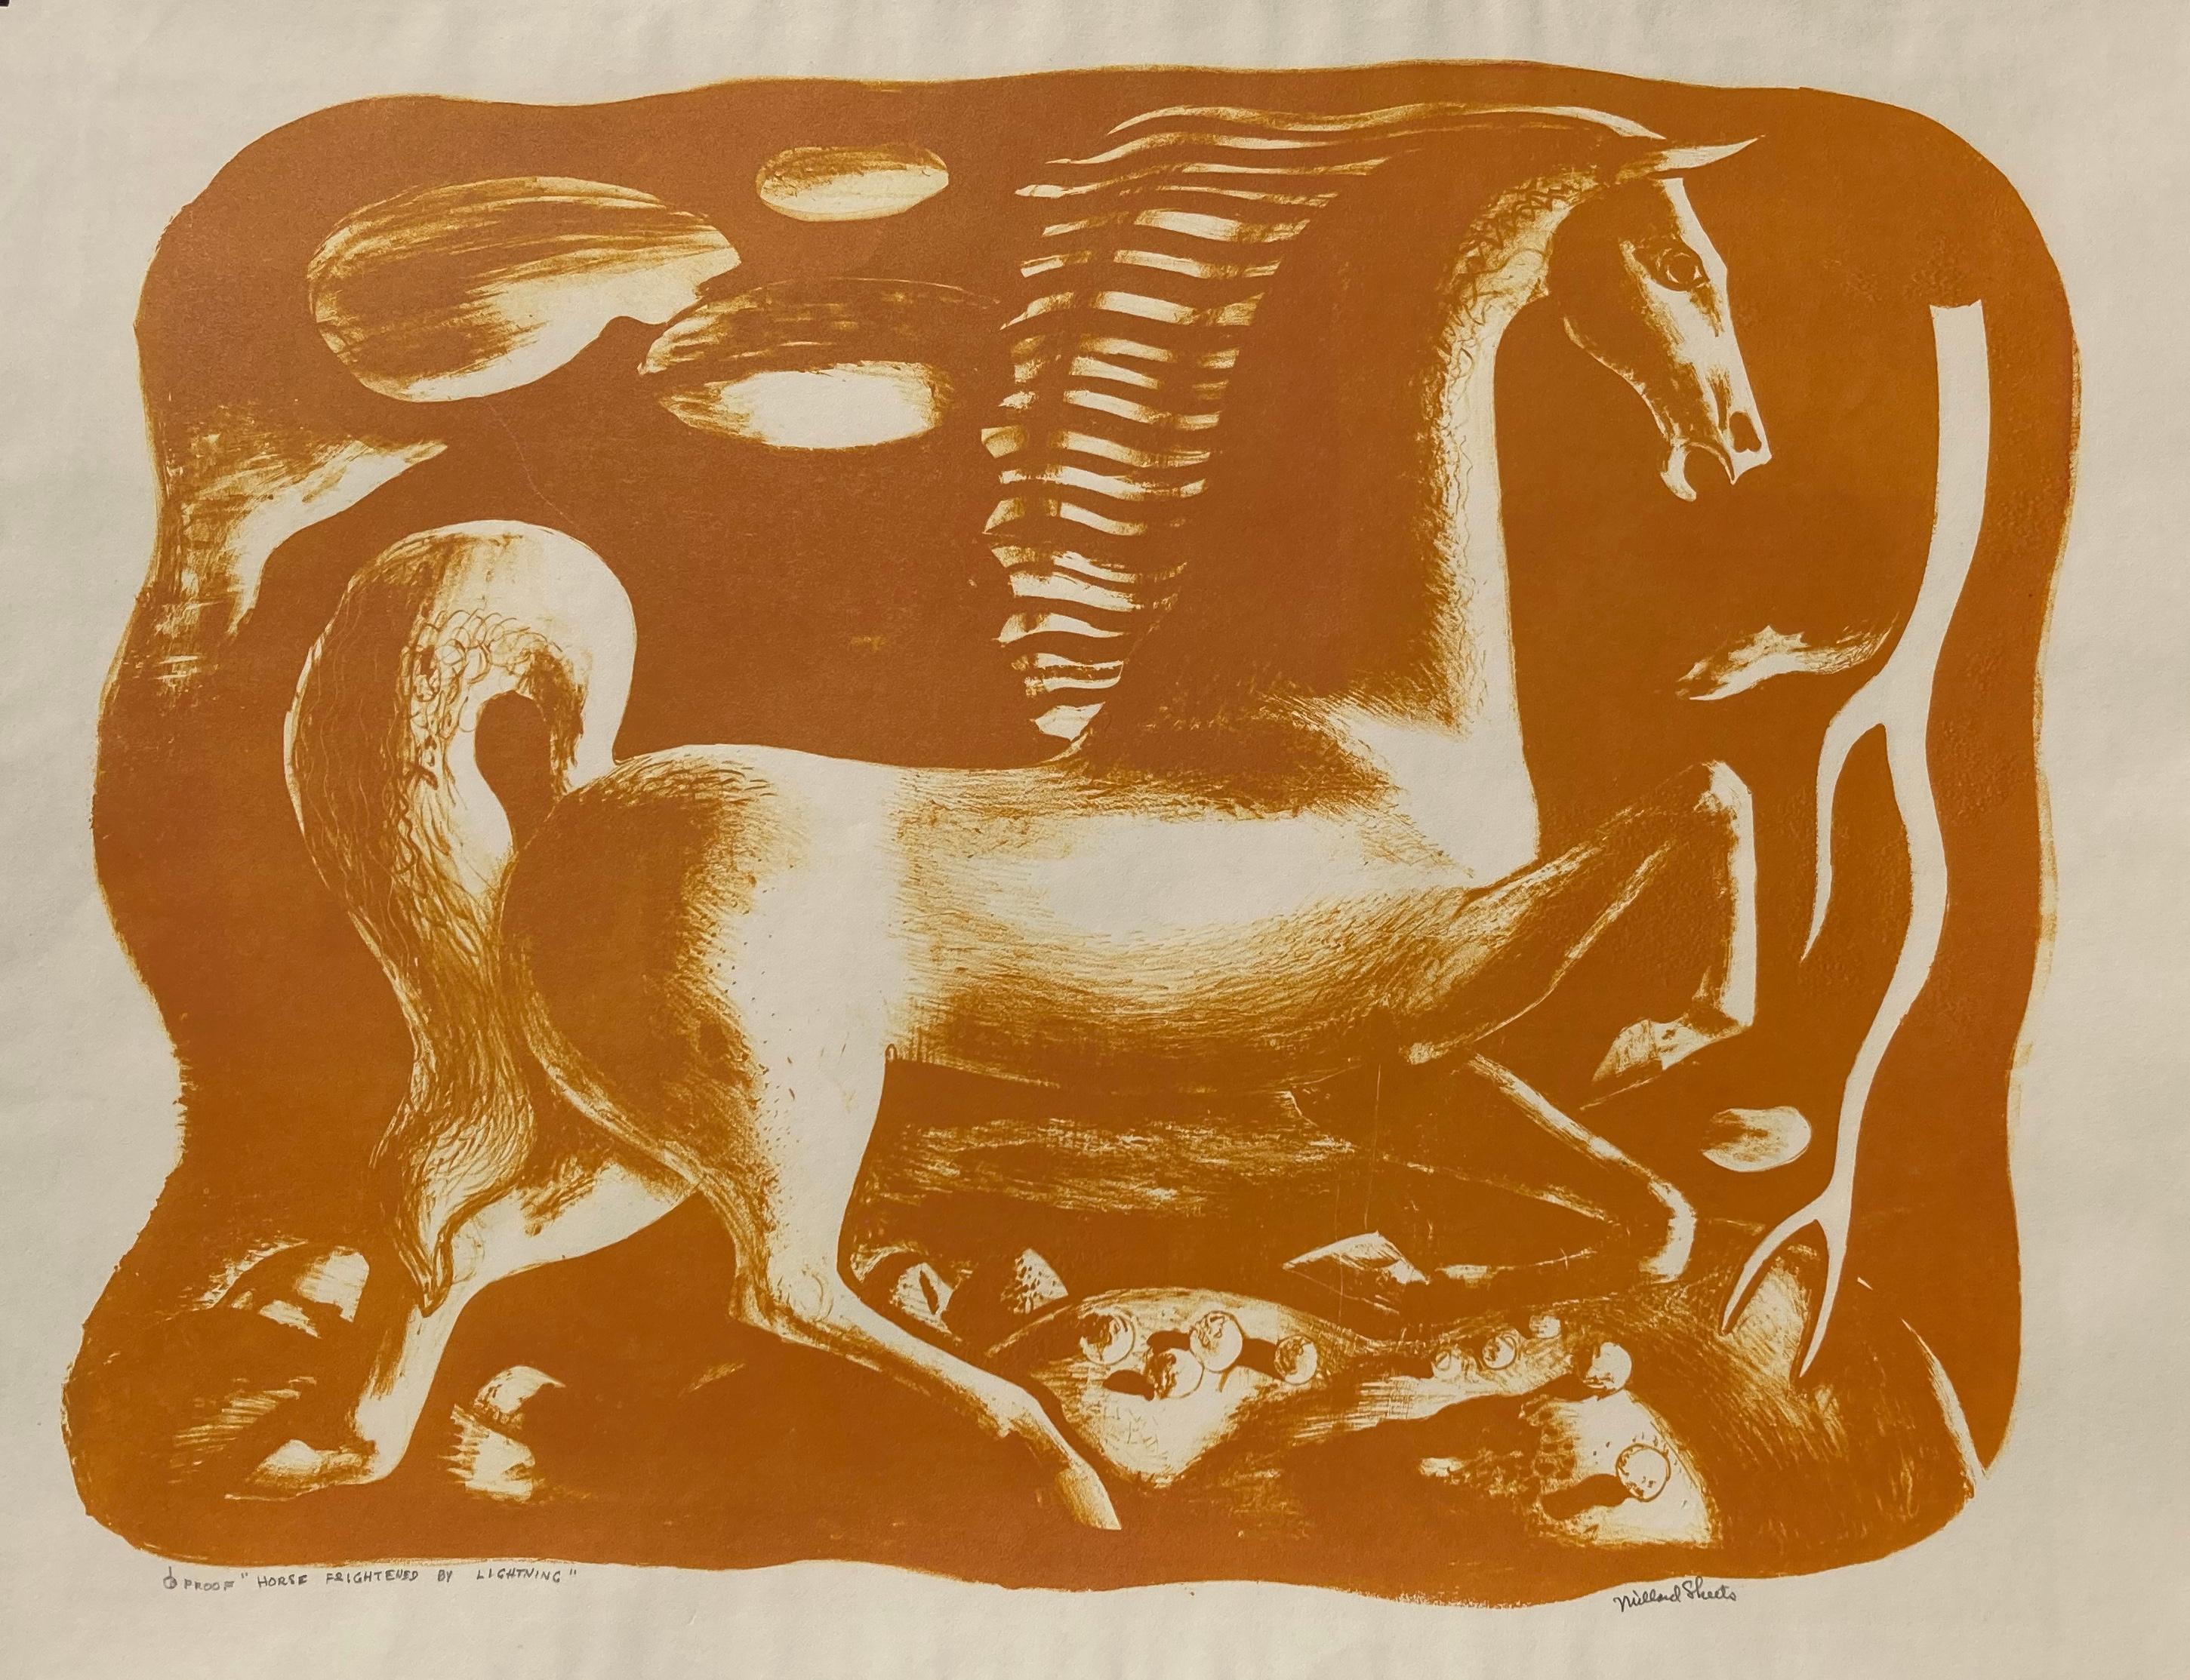 Millard Sheets Landscape Print - HORSE FRIGHTENED BY LIGHTNING - Proof imp - One of Sheet's Most Important Prints